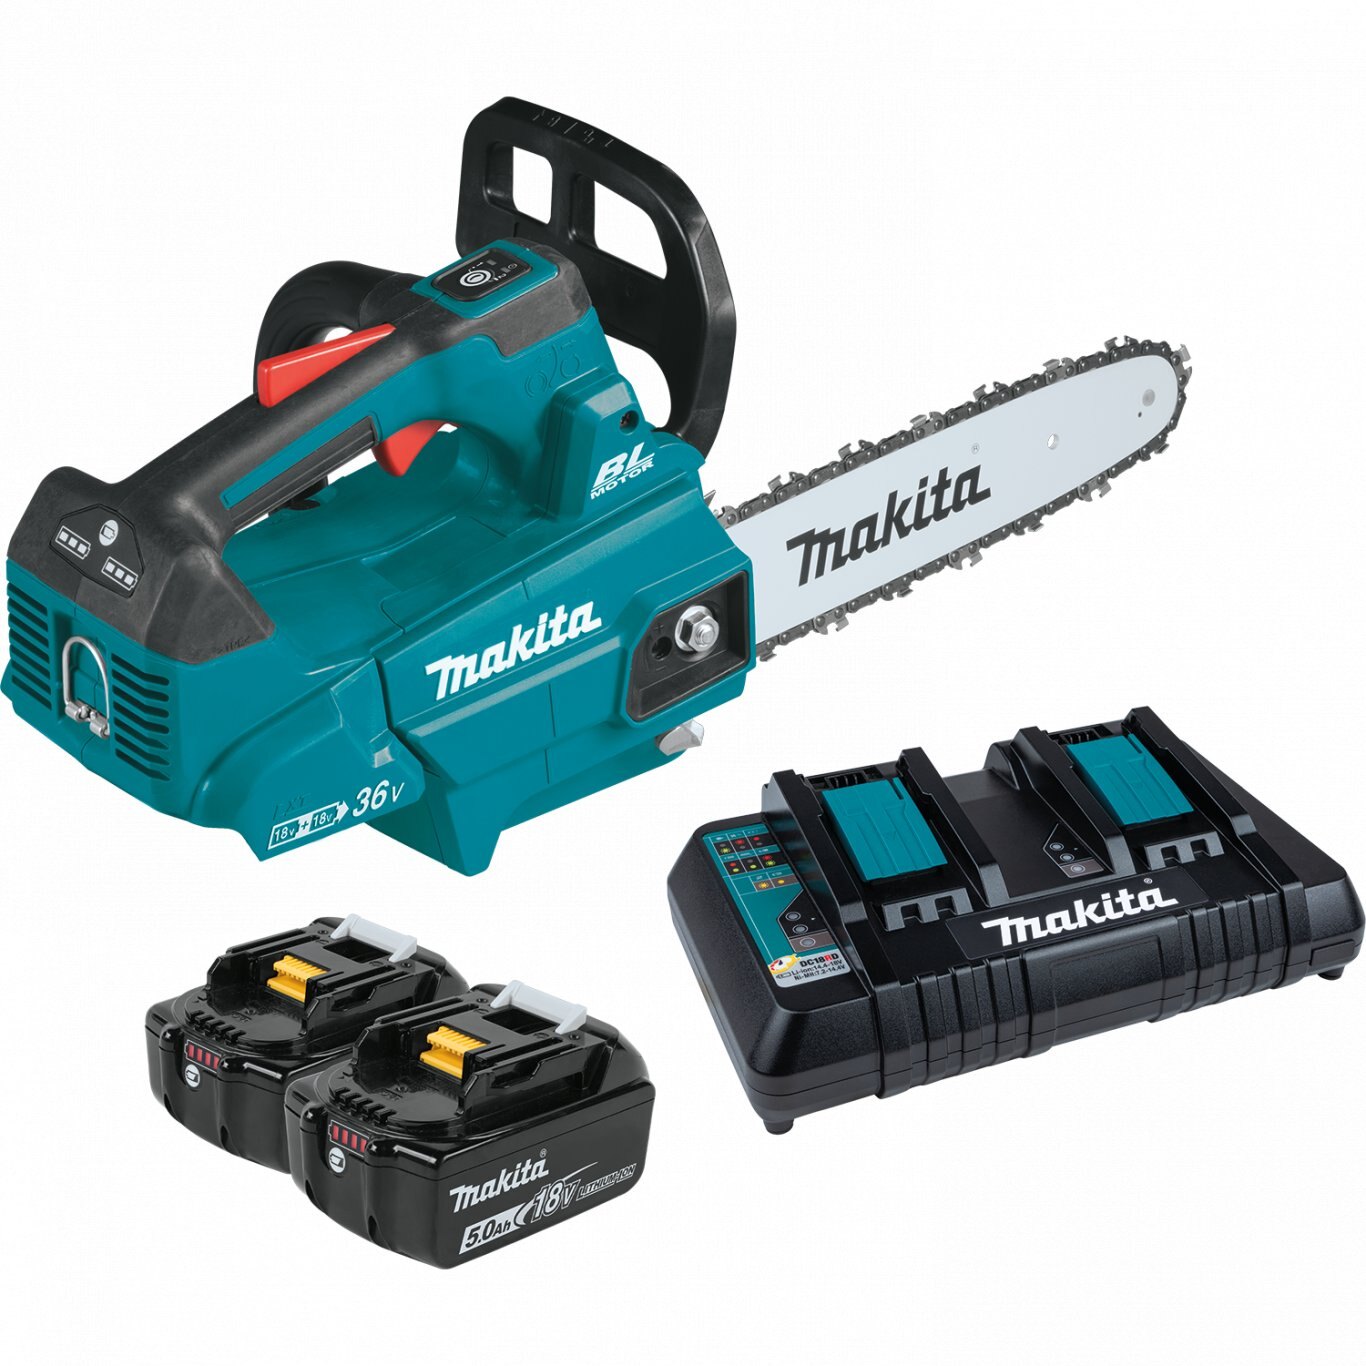 Makita 36V (18V X2) LXT® Brushless 16 Top Handle Chain Saw, Tool Only